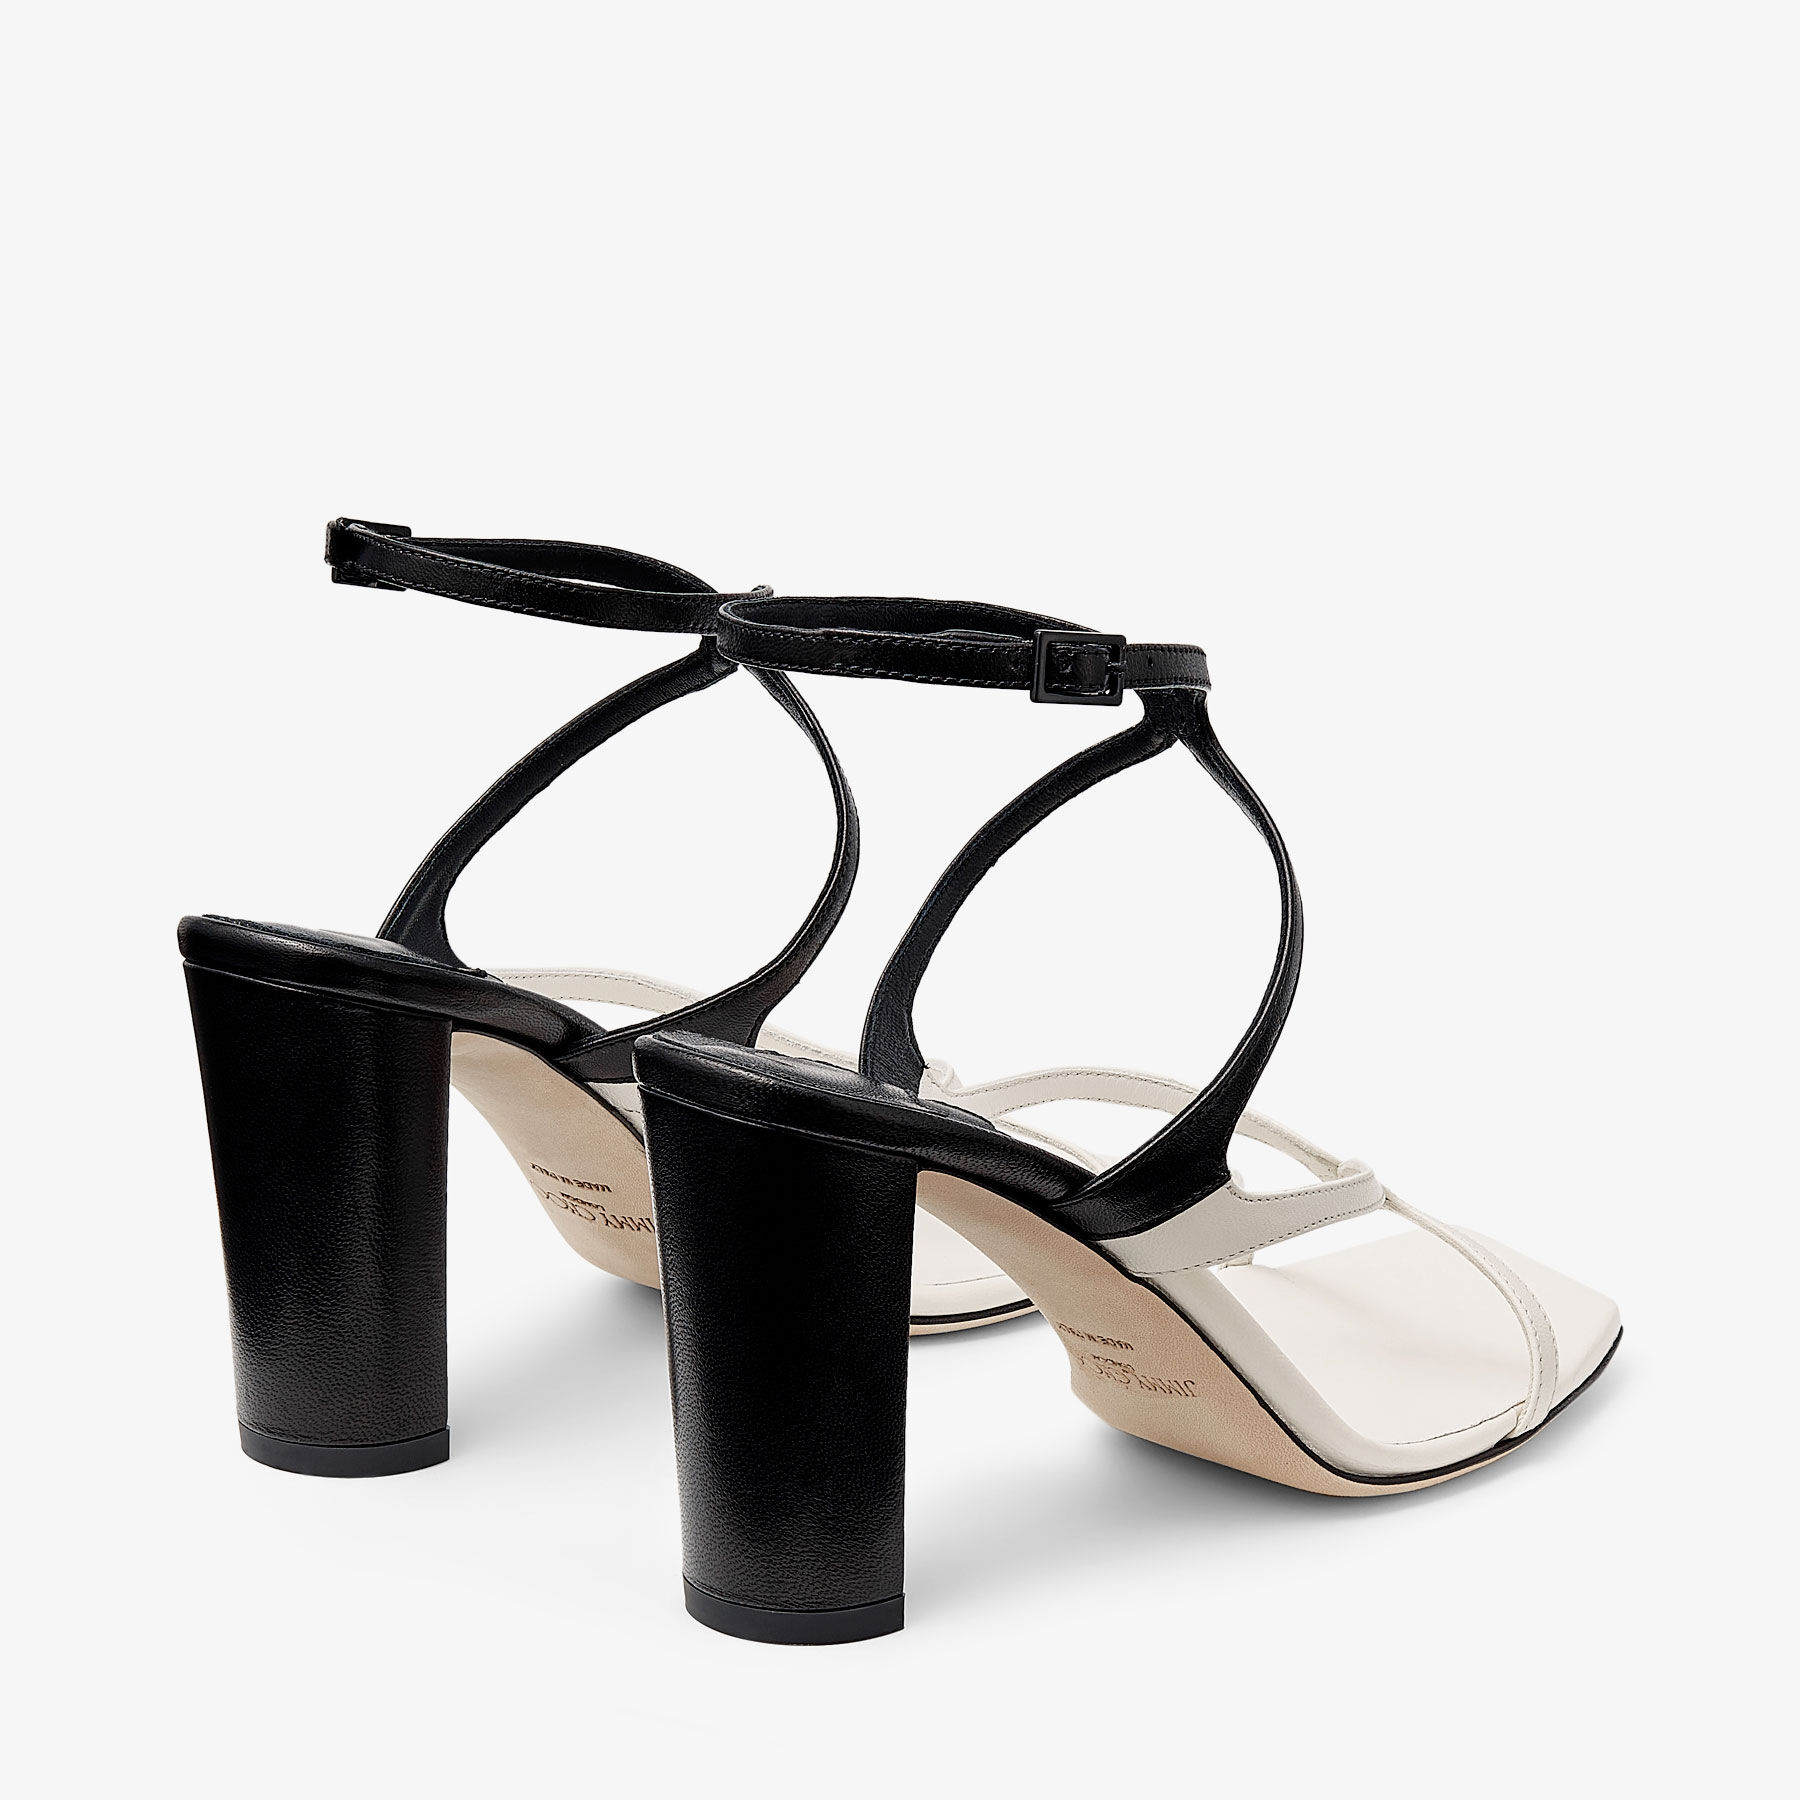 Azie 85 | Latte and Black Patchwork Nappa Leather Sandals | JIMMY CHOO